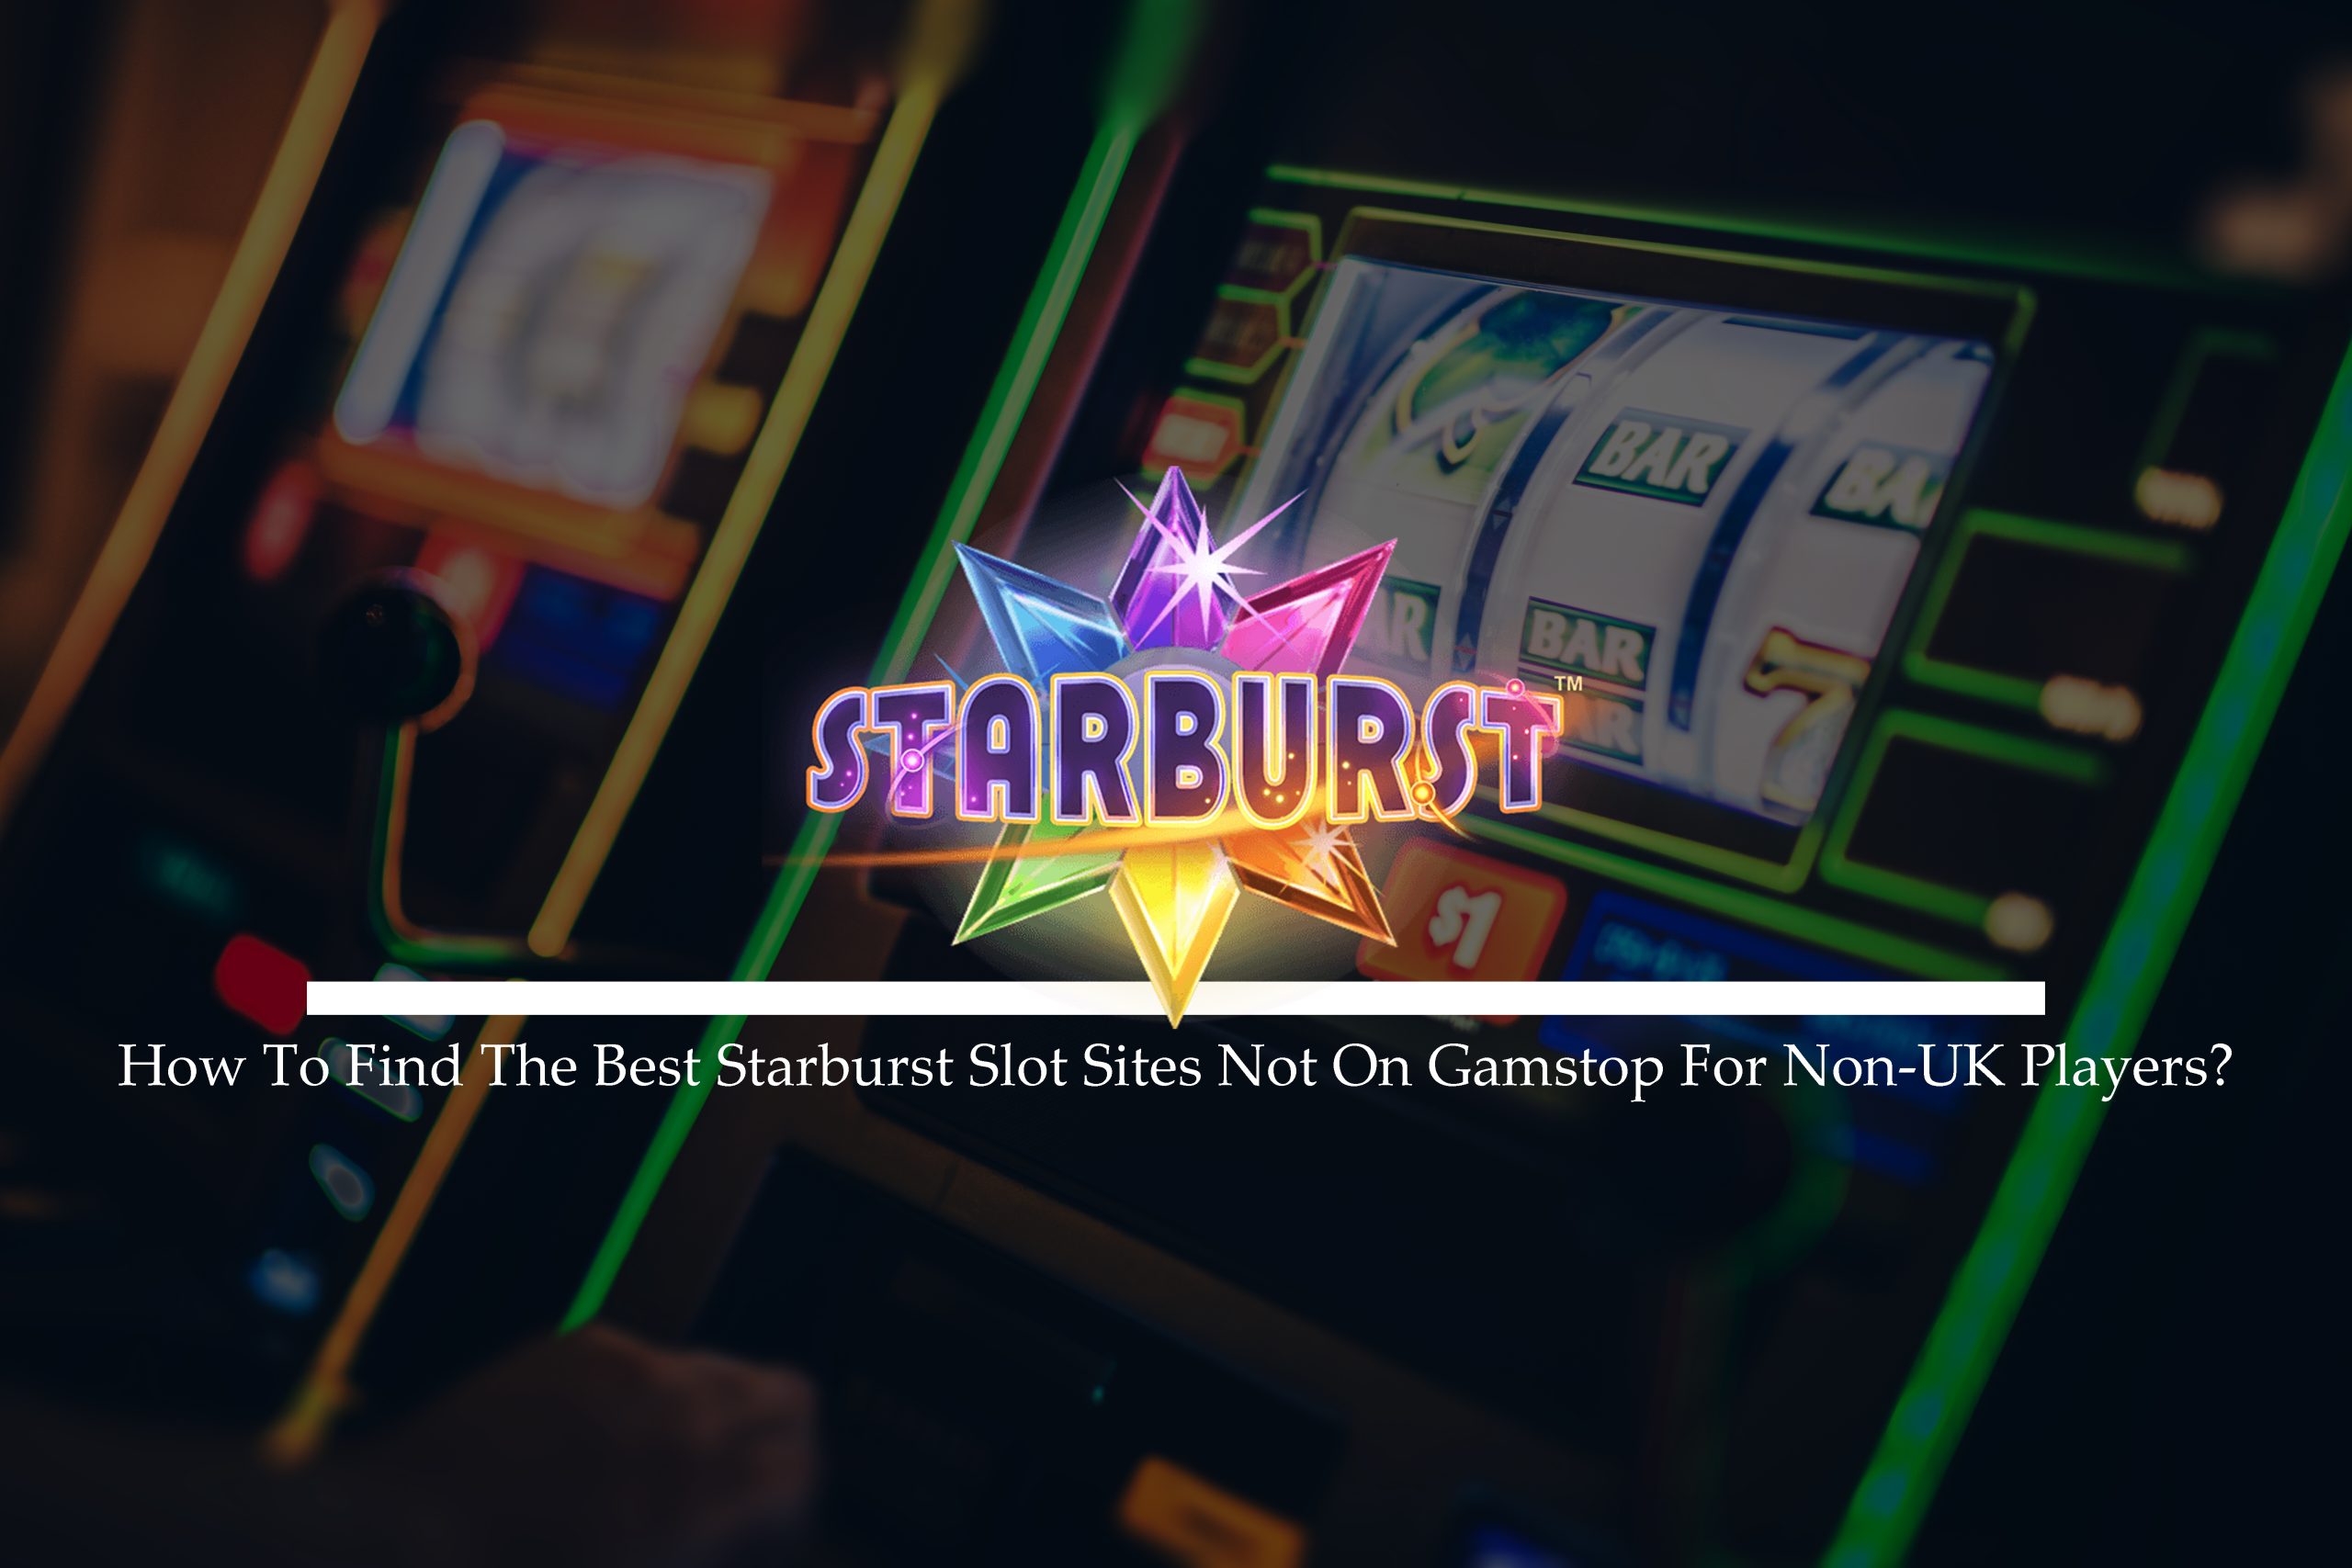 How To Find The Best Starburst Slot Sites Not On Gamstop For Non-UK Players?